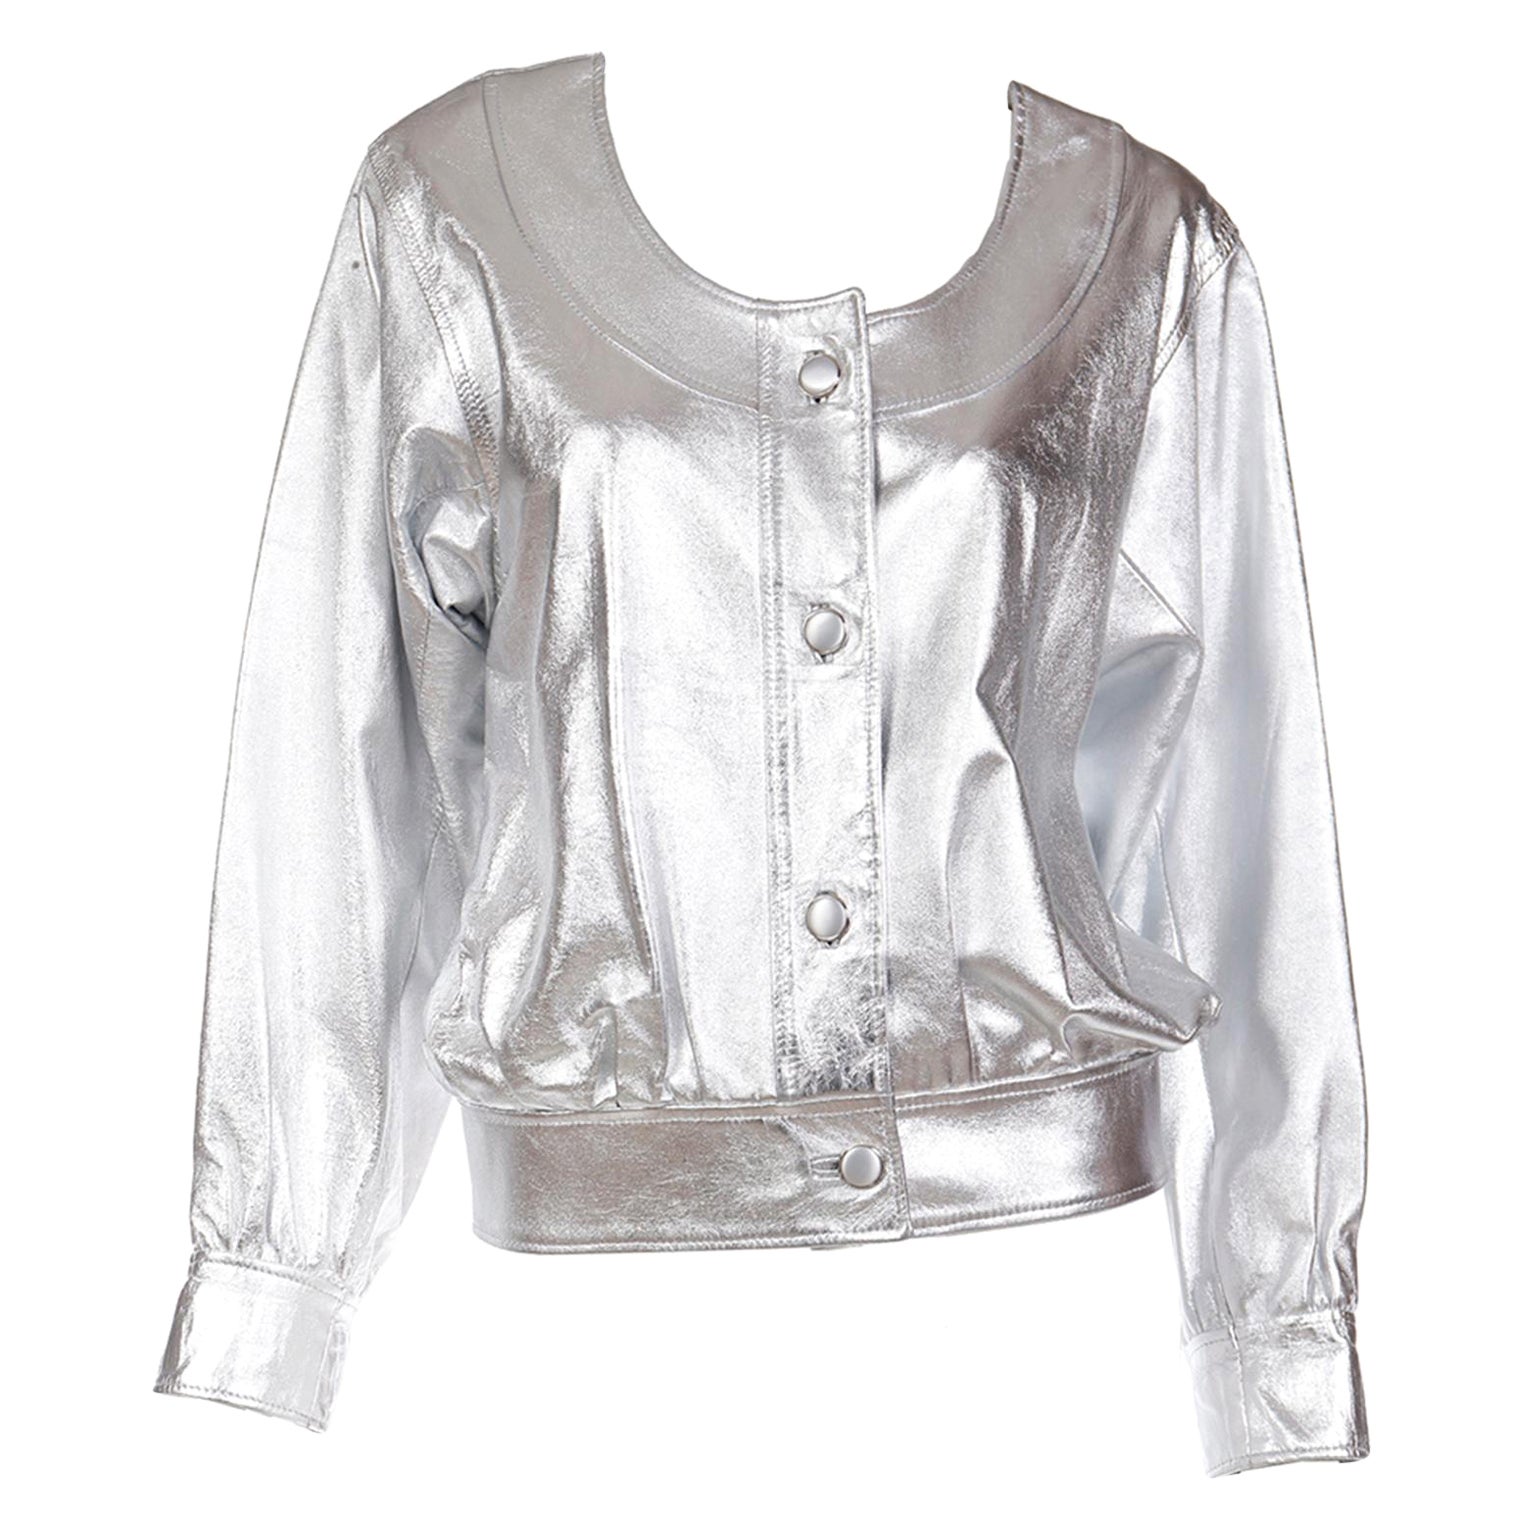 1982 Yves Saint Laurent Silver Leather Documented Runway Jacket For Sale